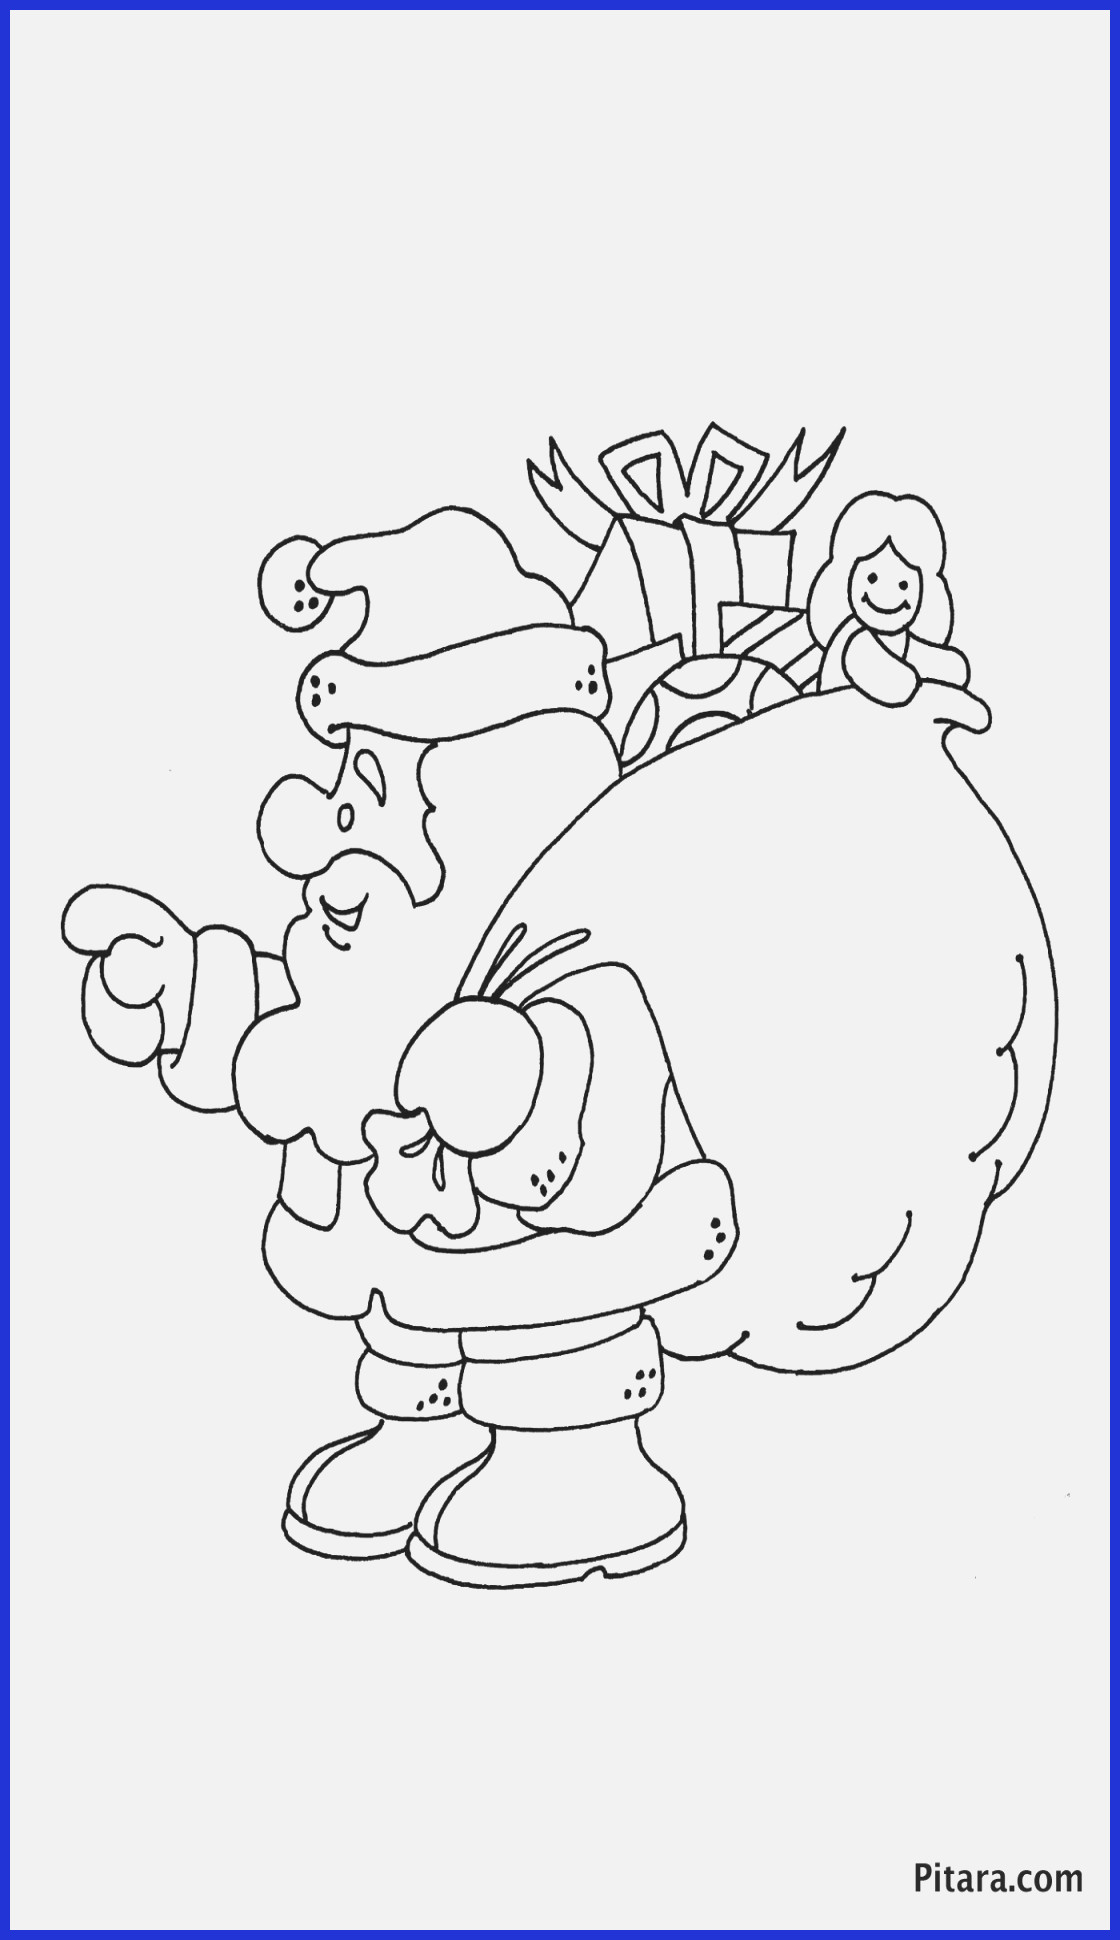 Santa Claus In Sleigh Coloring Page Santa Sleigh Coloring Pages Santa Claus His Sleigh Coloring Pages